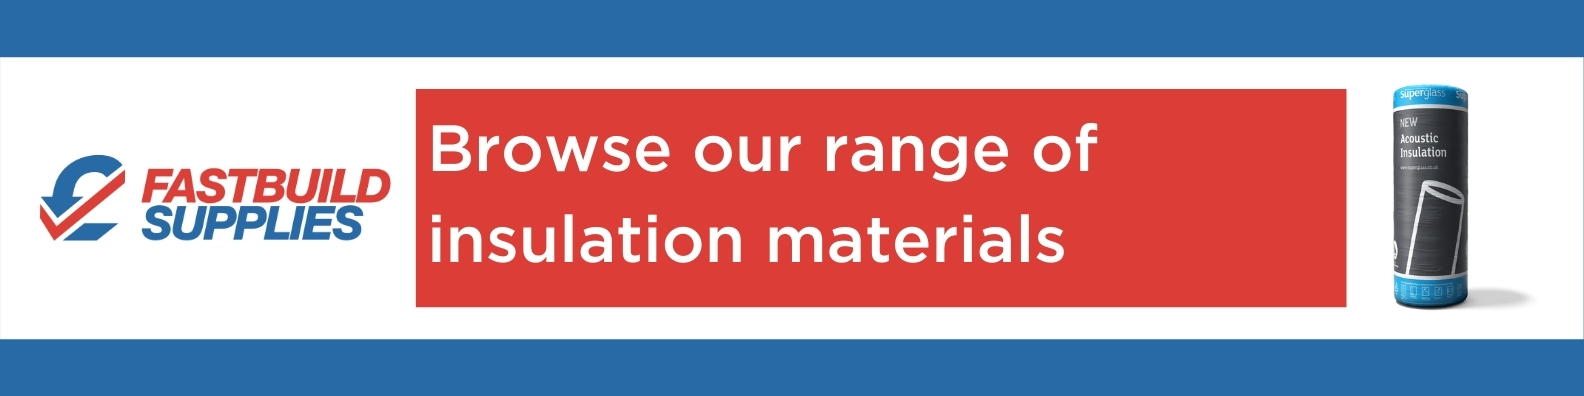 Browse our range of insulation materials at Fastbuild